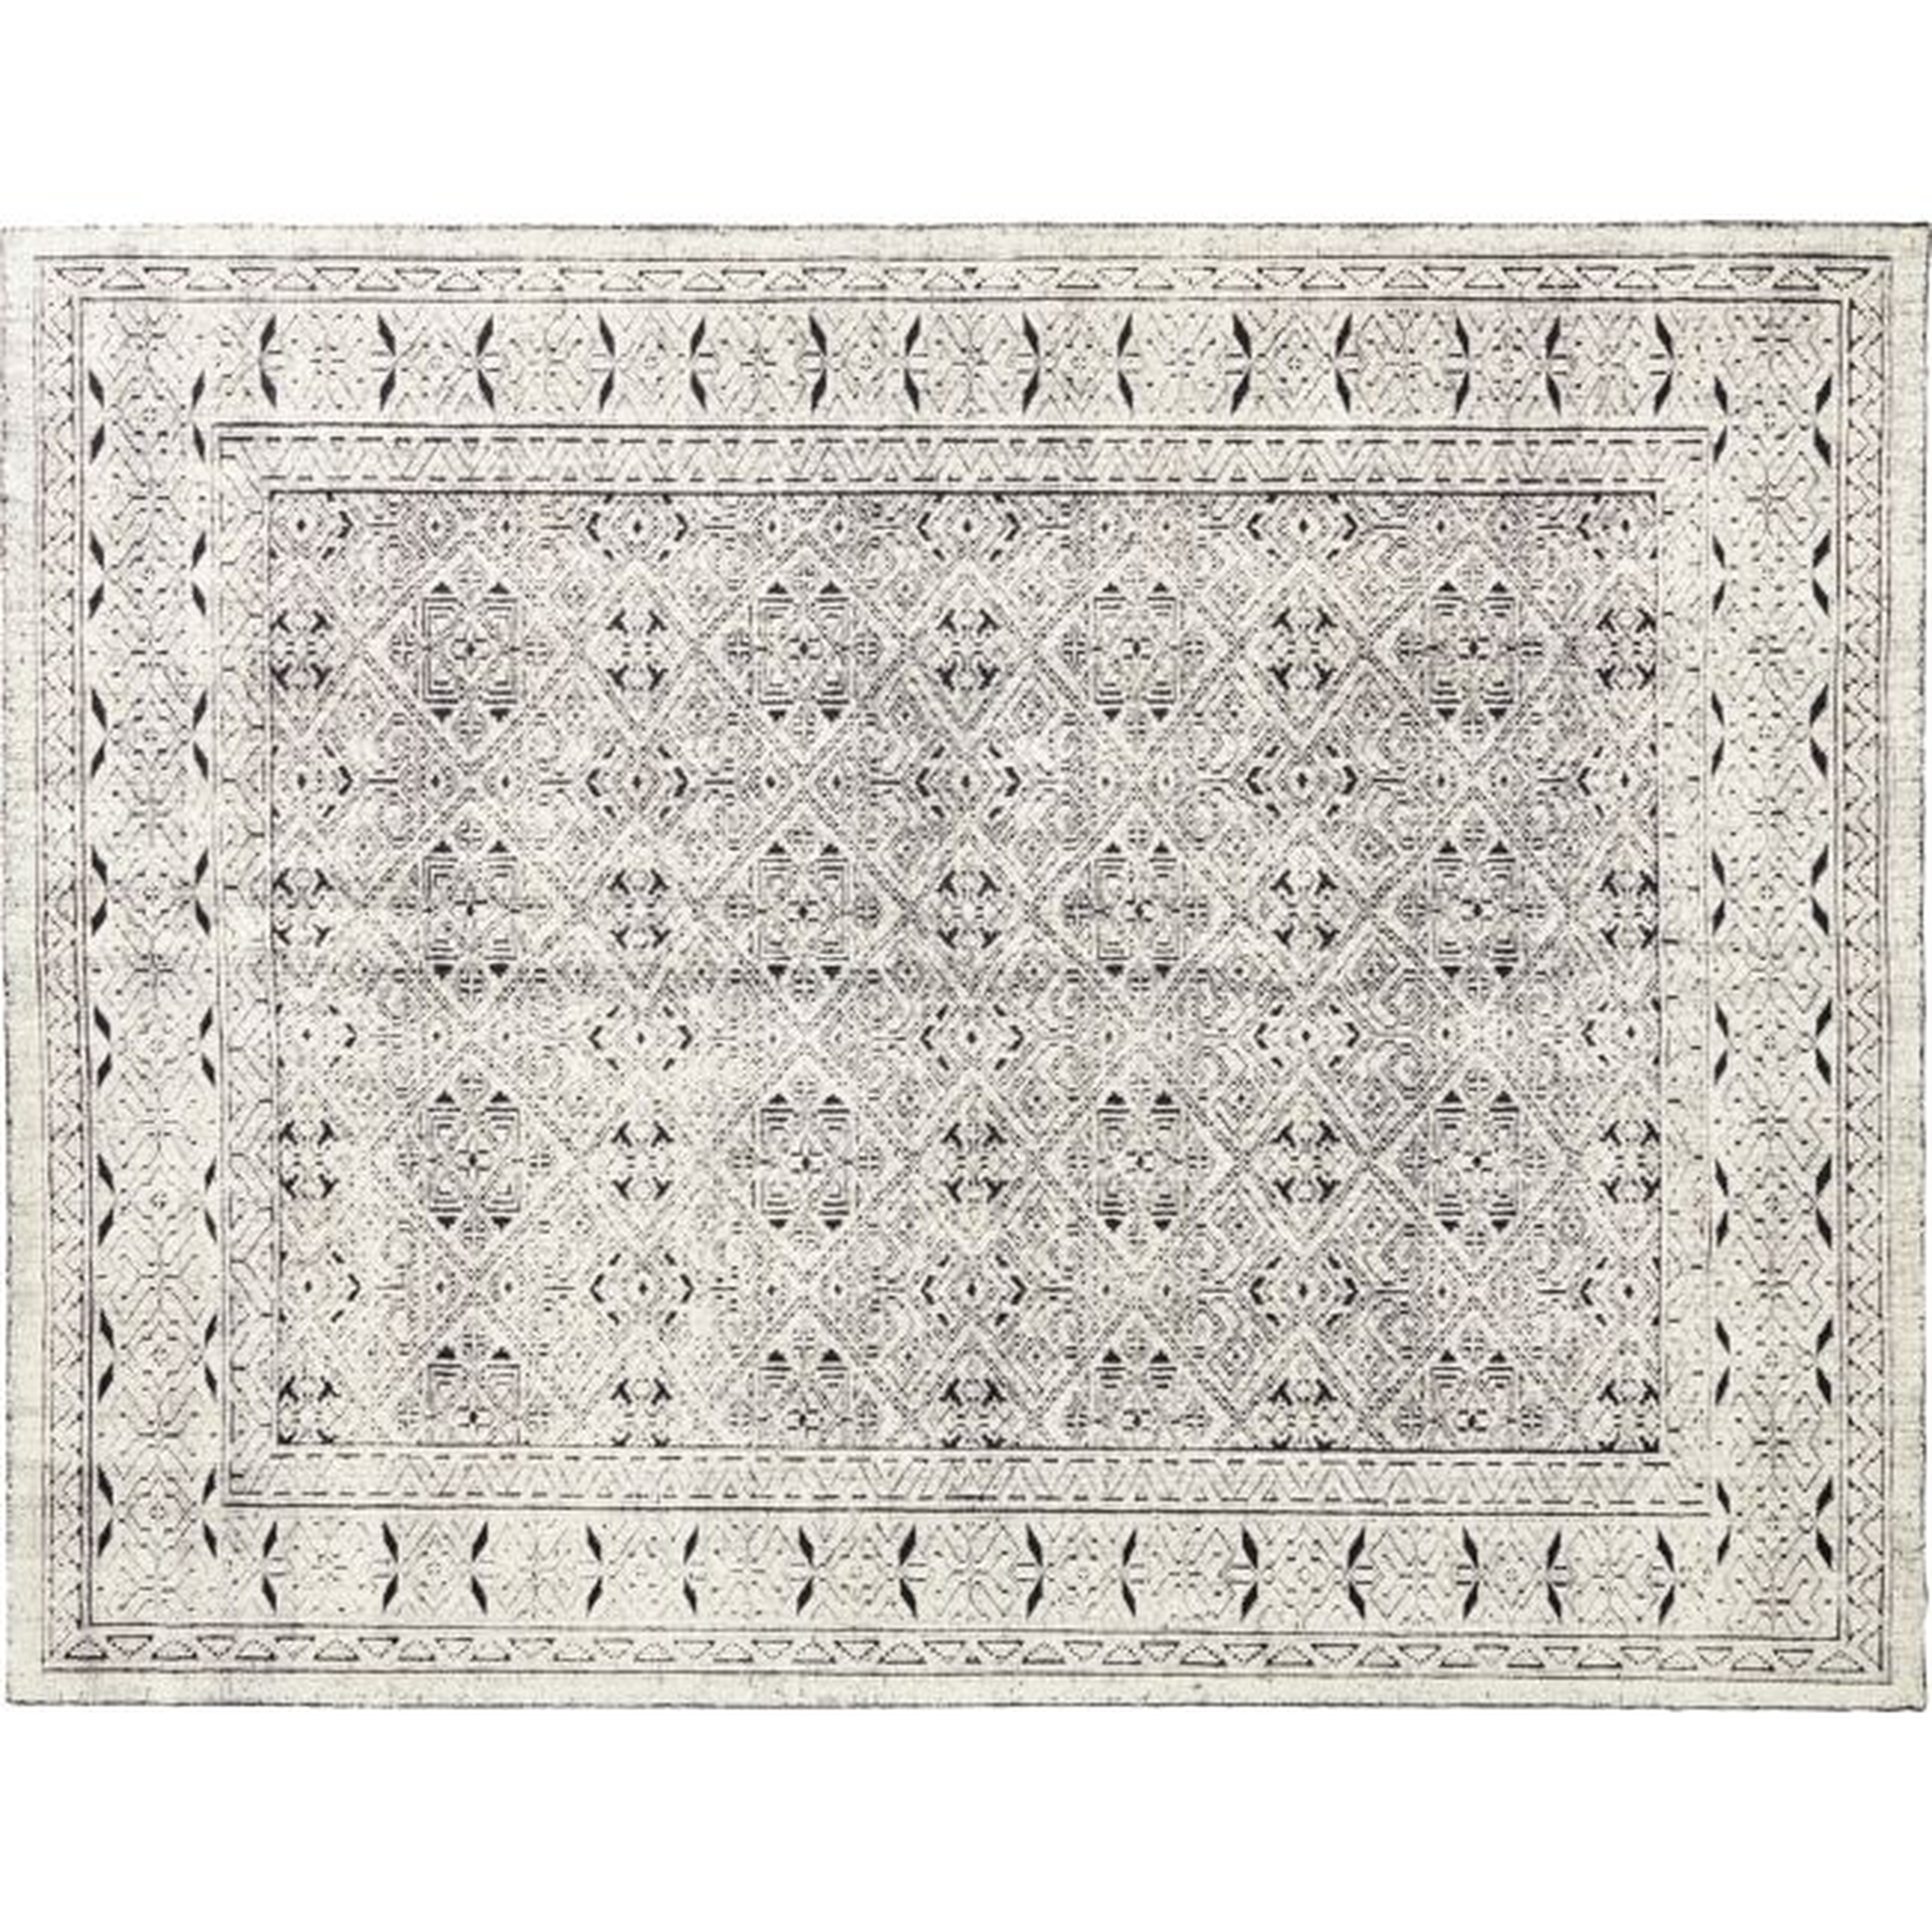 Raumont Hand-Knotted Black Detailed Modern Area Rug 9'x12' - CB2